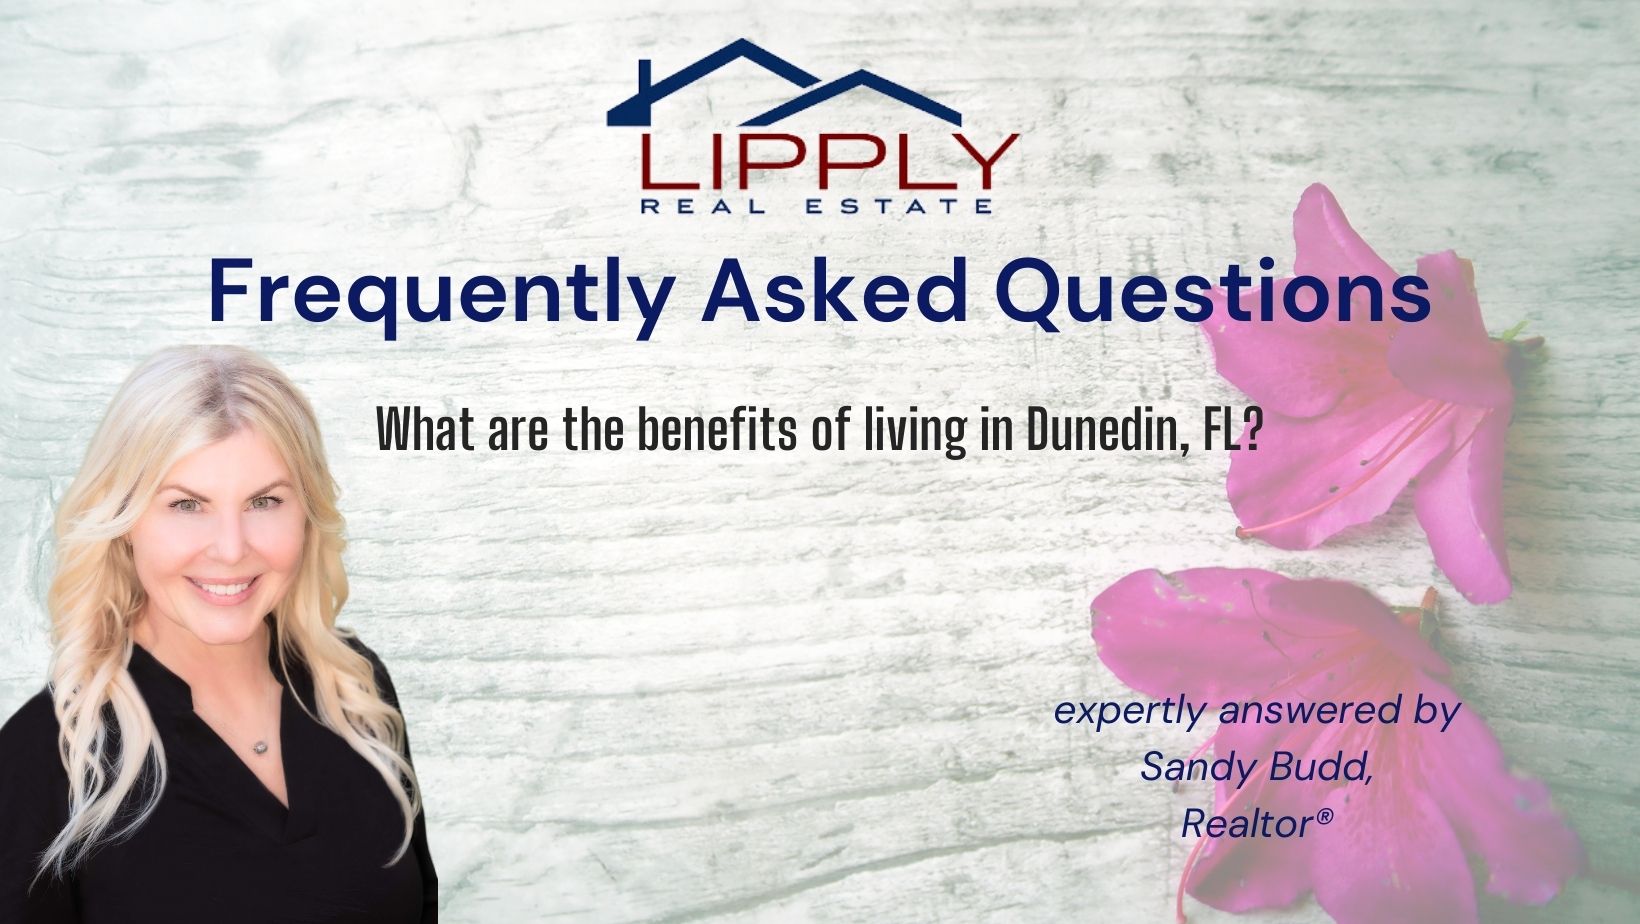 What are the benefits of living in Dunedin, FL?